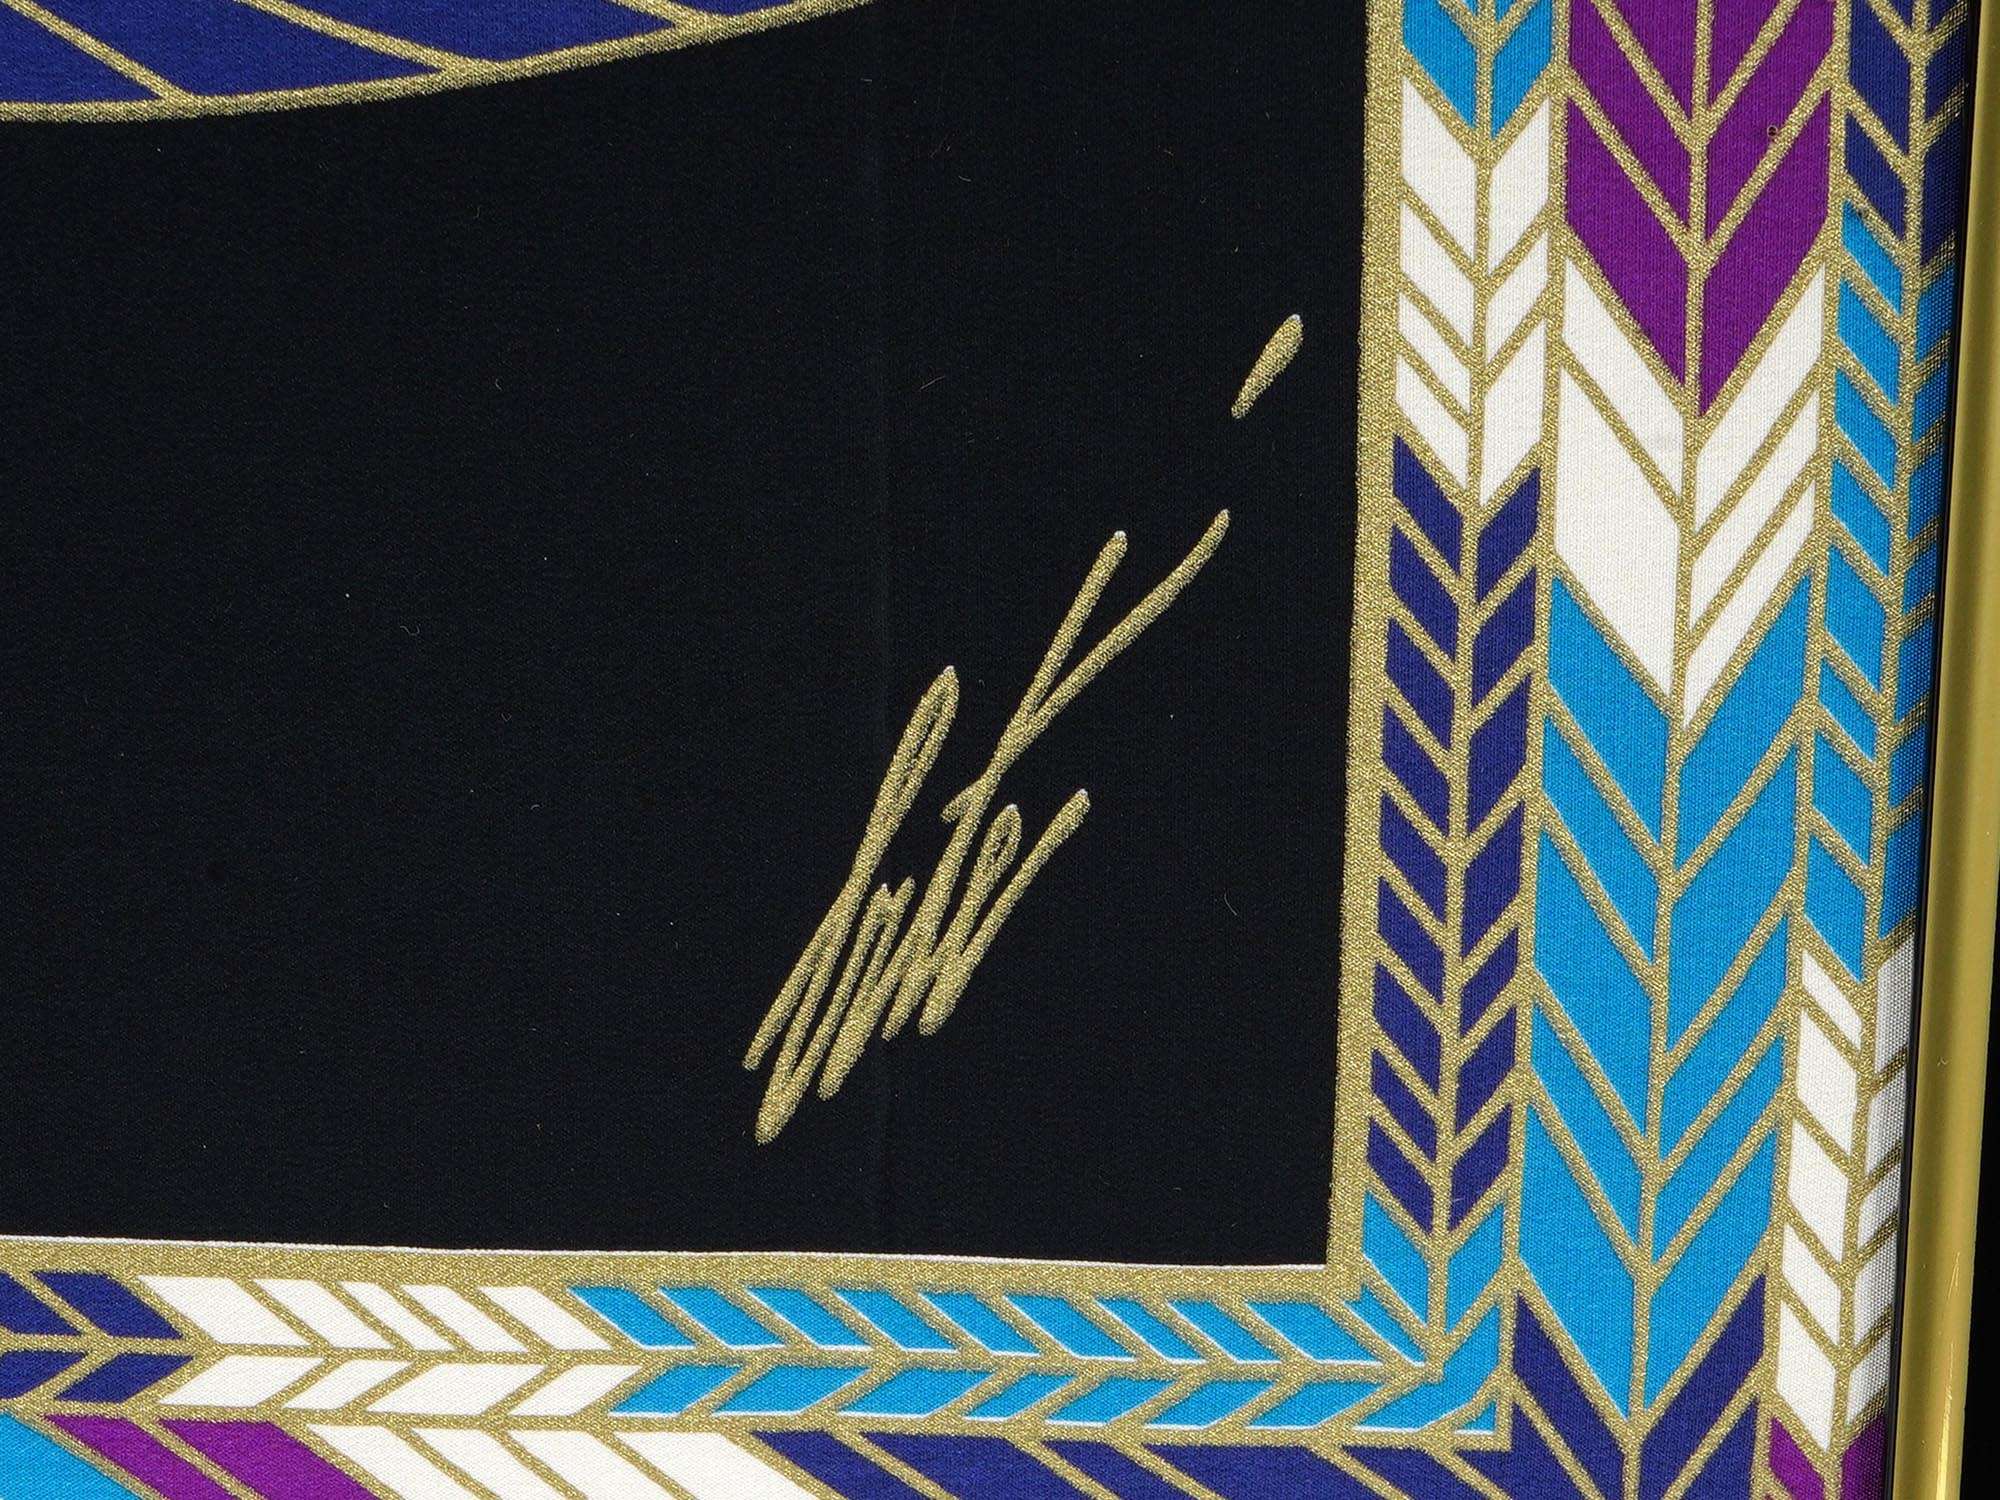 ART DECO FRENCH NILE SILK SCARF ART BY ERTE SIGNED PIC-3